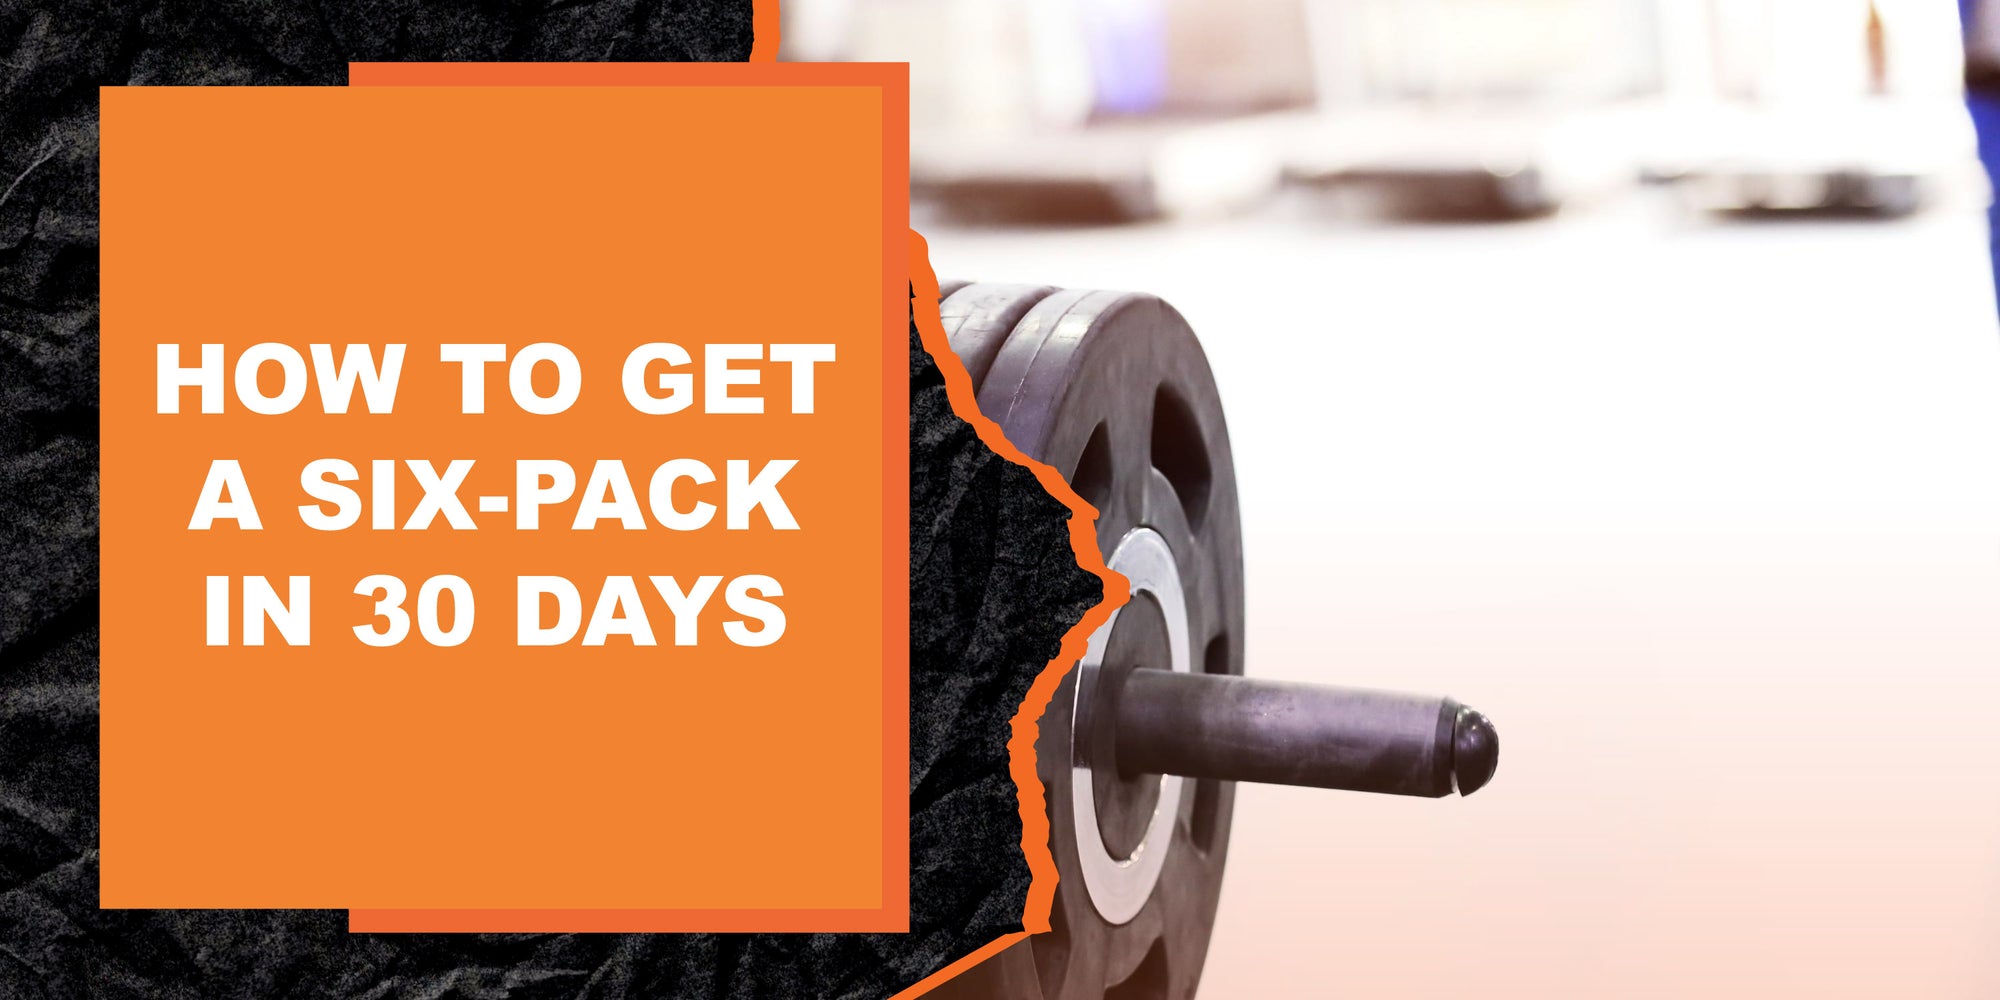 How to Get a Six-Pack in 30 Days